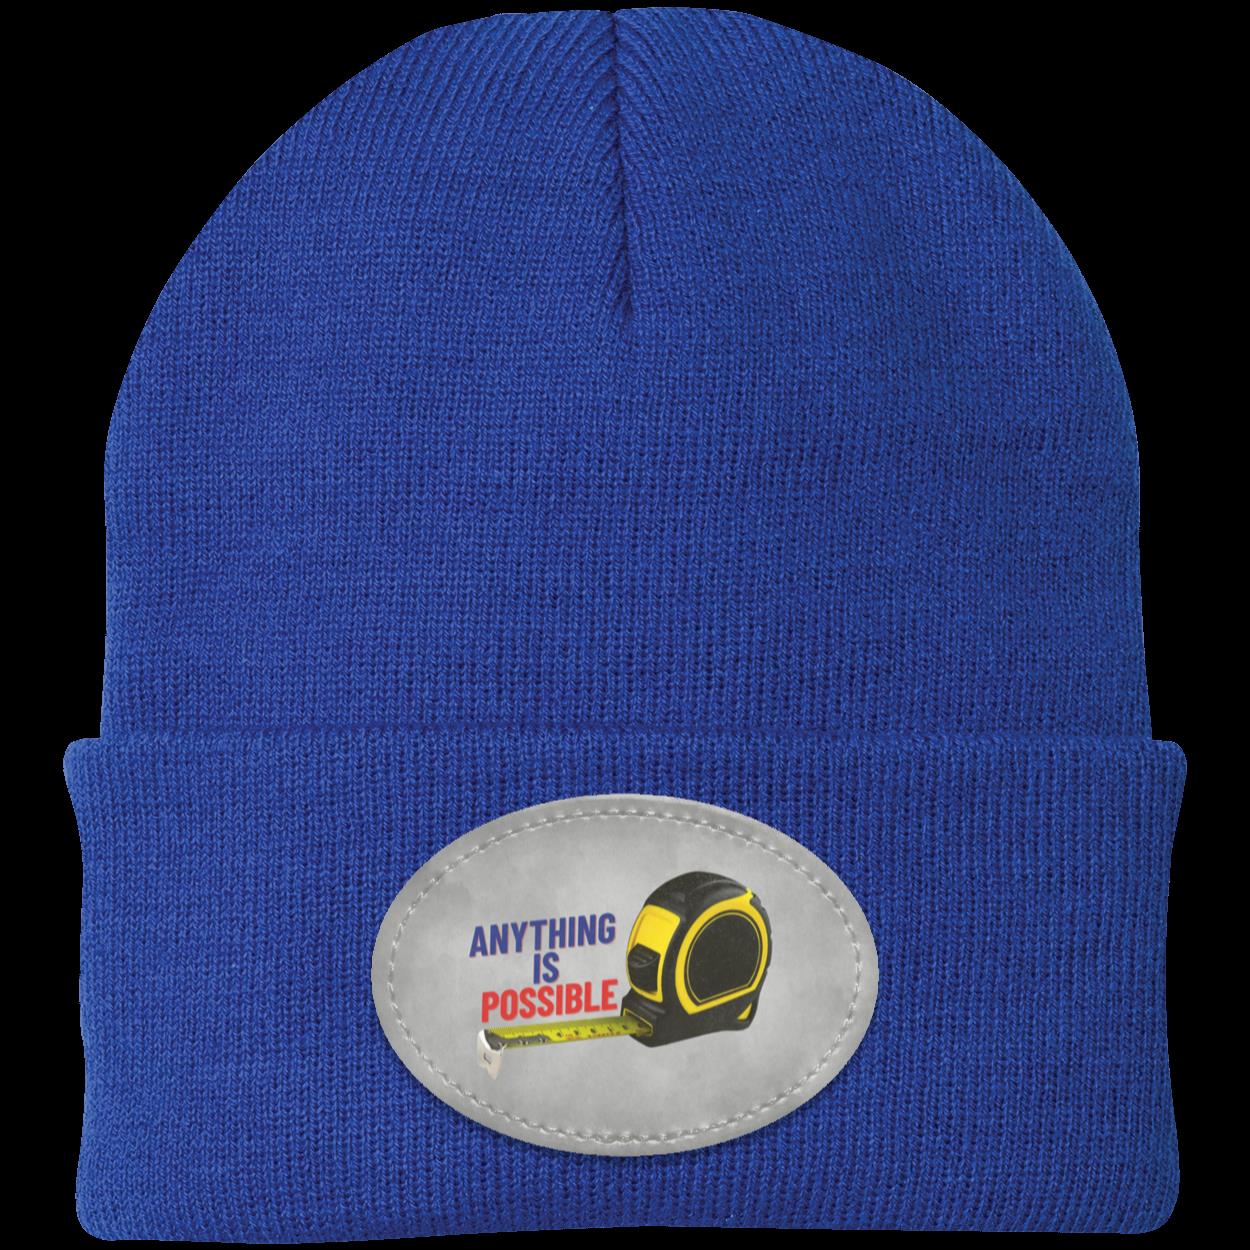 Anything is Possible Measuring Tape Knit Beanie with Printed Patch in Assorted Colors